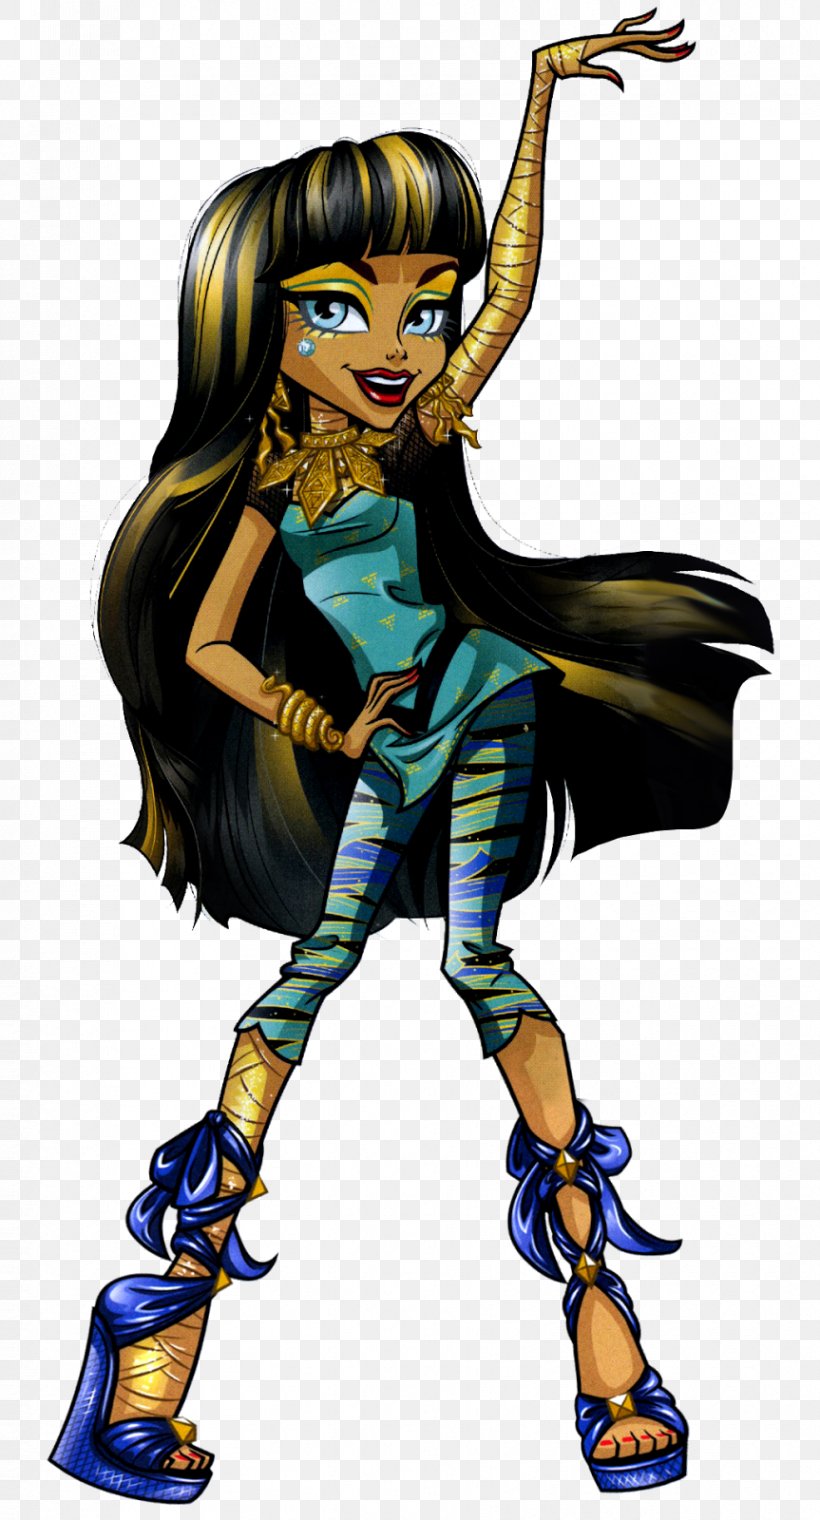 Monster High Cleo De Nile Doll Toy, PNG, 863x1600px, Monster High, Art, Barbie, Doll, Fiction Download Free